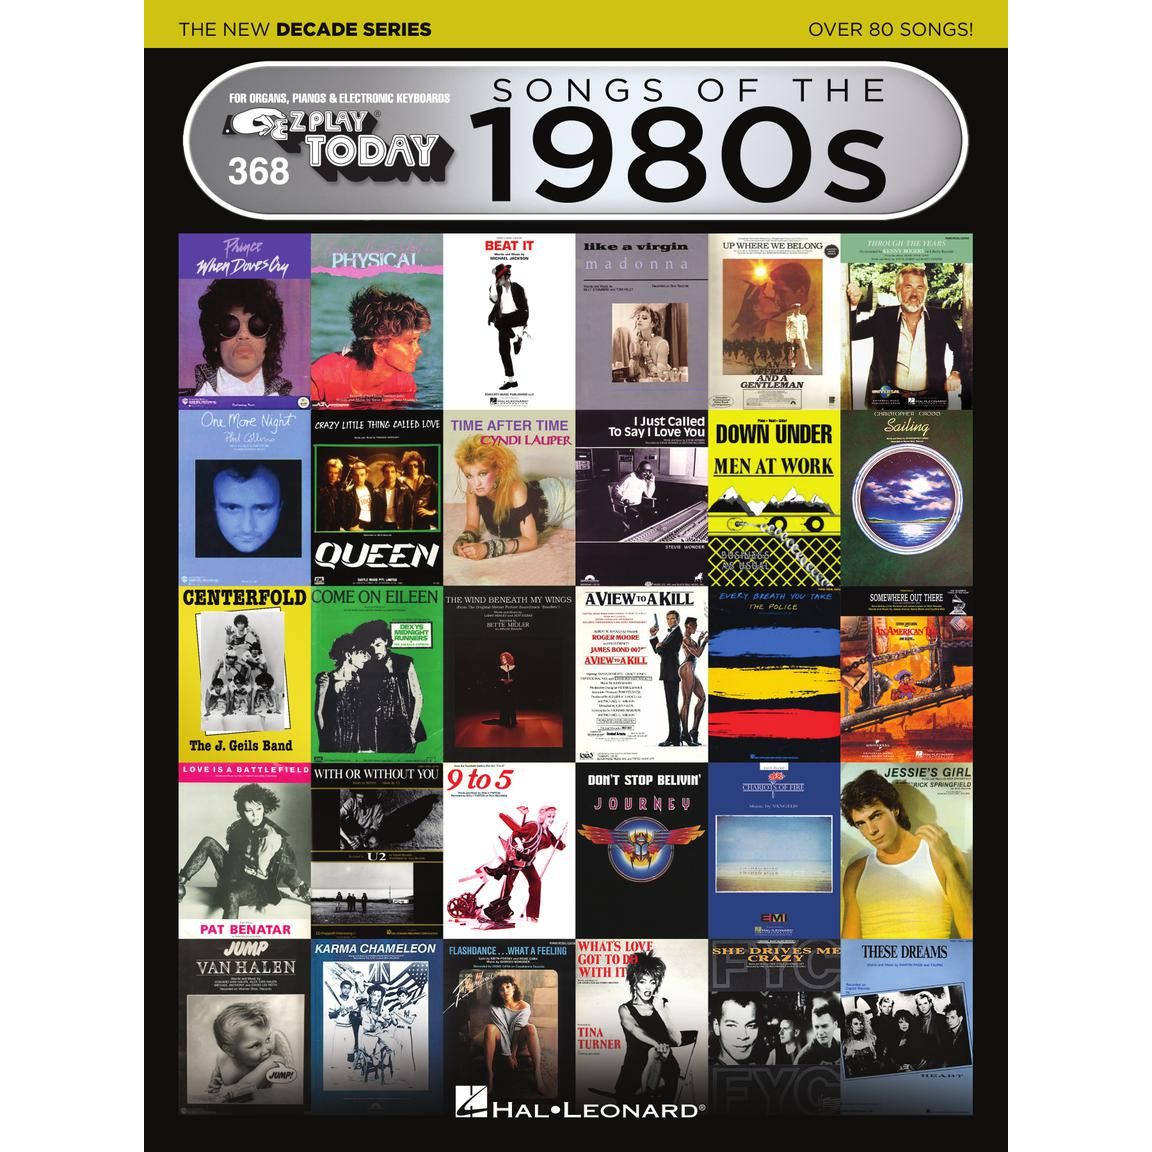 EZ Play 368 - Songs of the 1980s - The New Decade Series